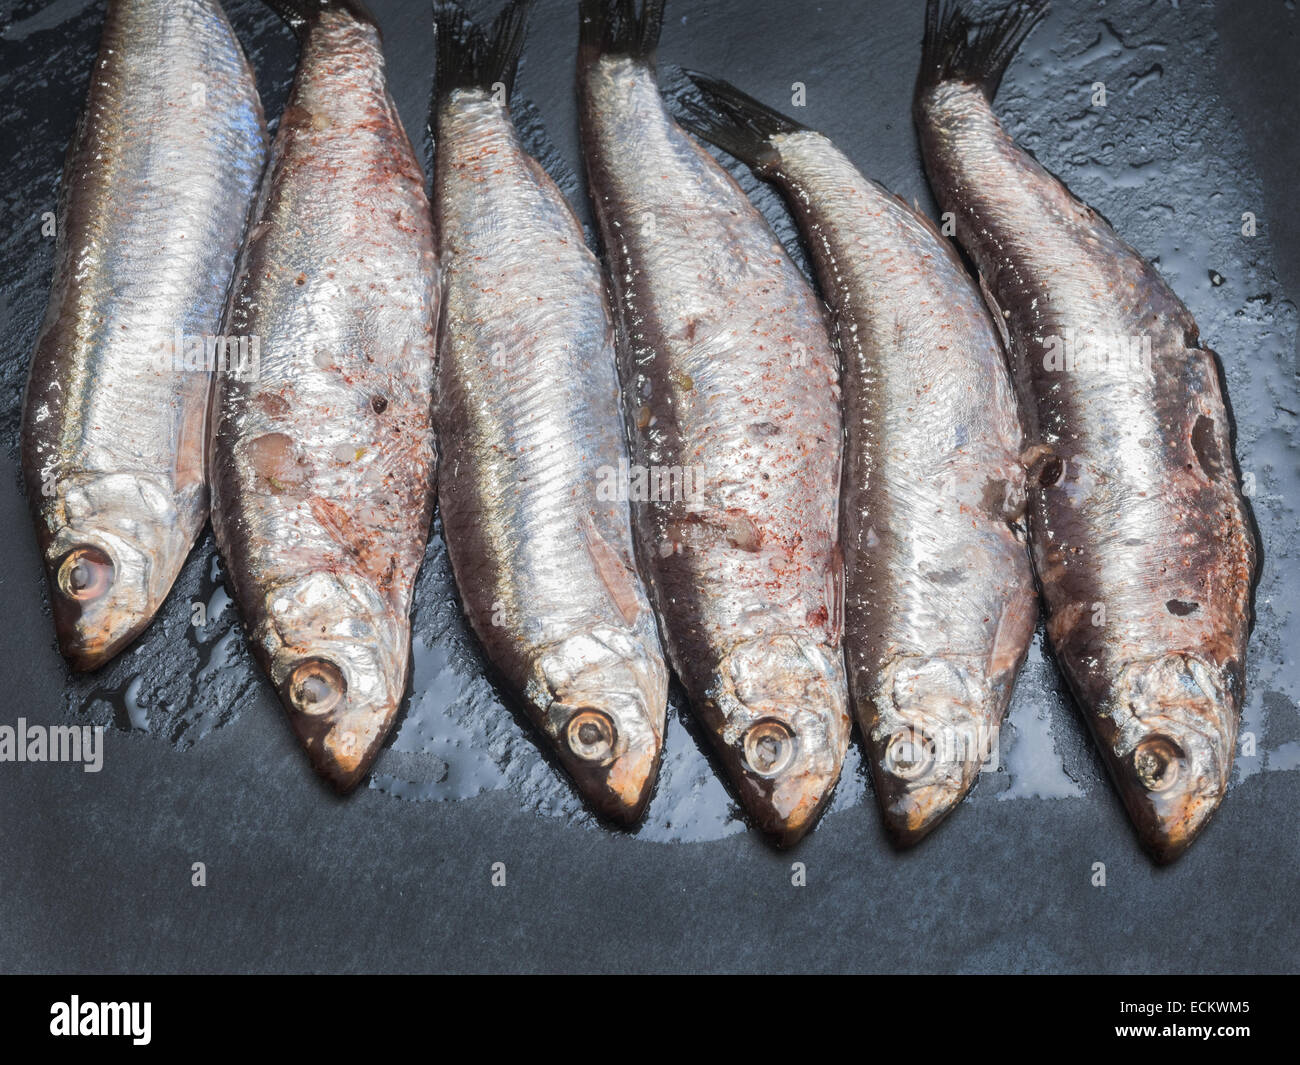 Anchovies sardines all ready to eat Stock Photo